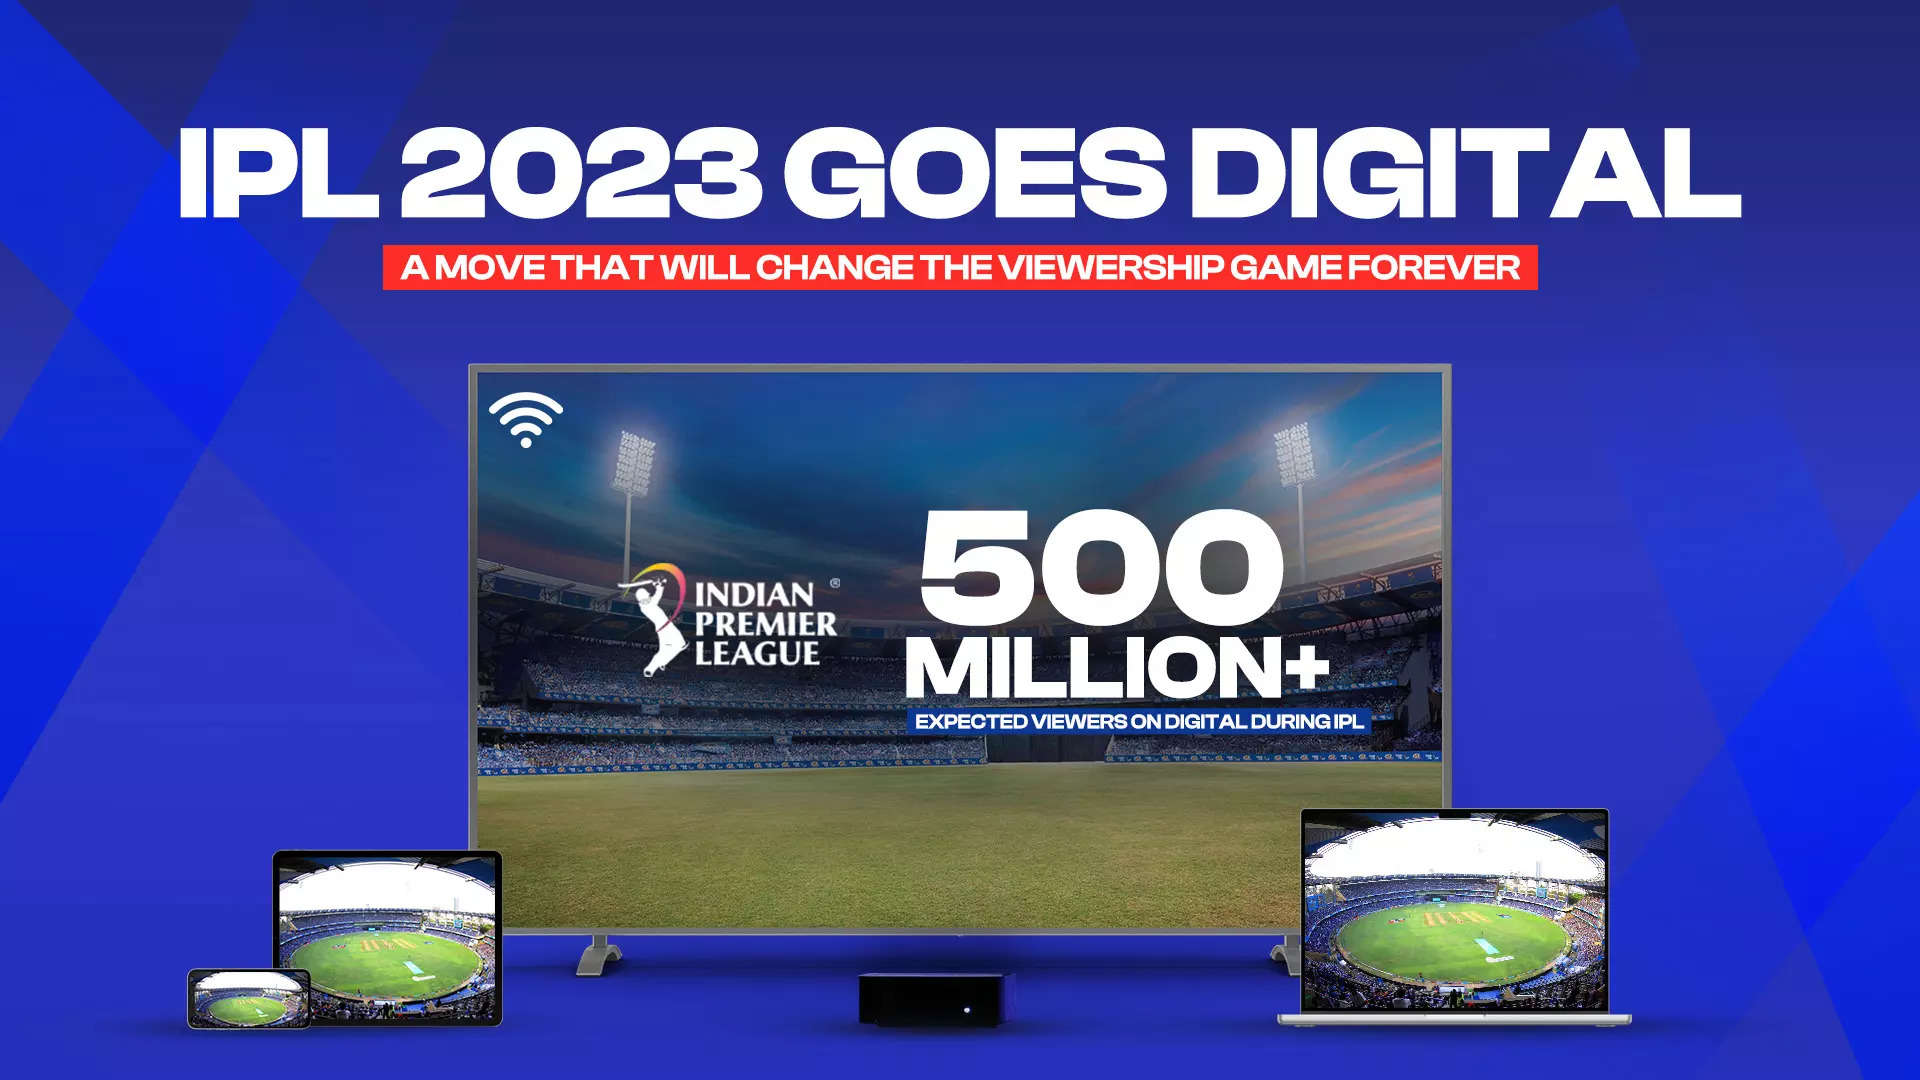 IPL 2023 Goes Digital A Move that will Change the Viewership Game Forever, ET BrandEquity